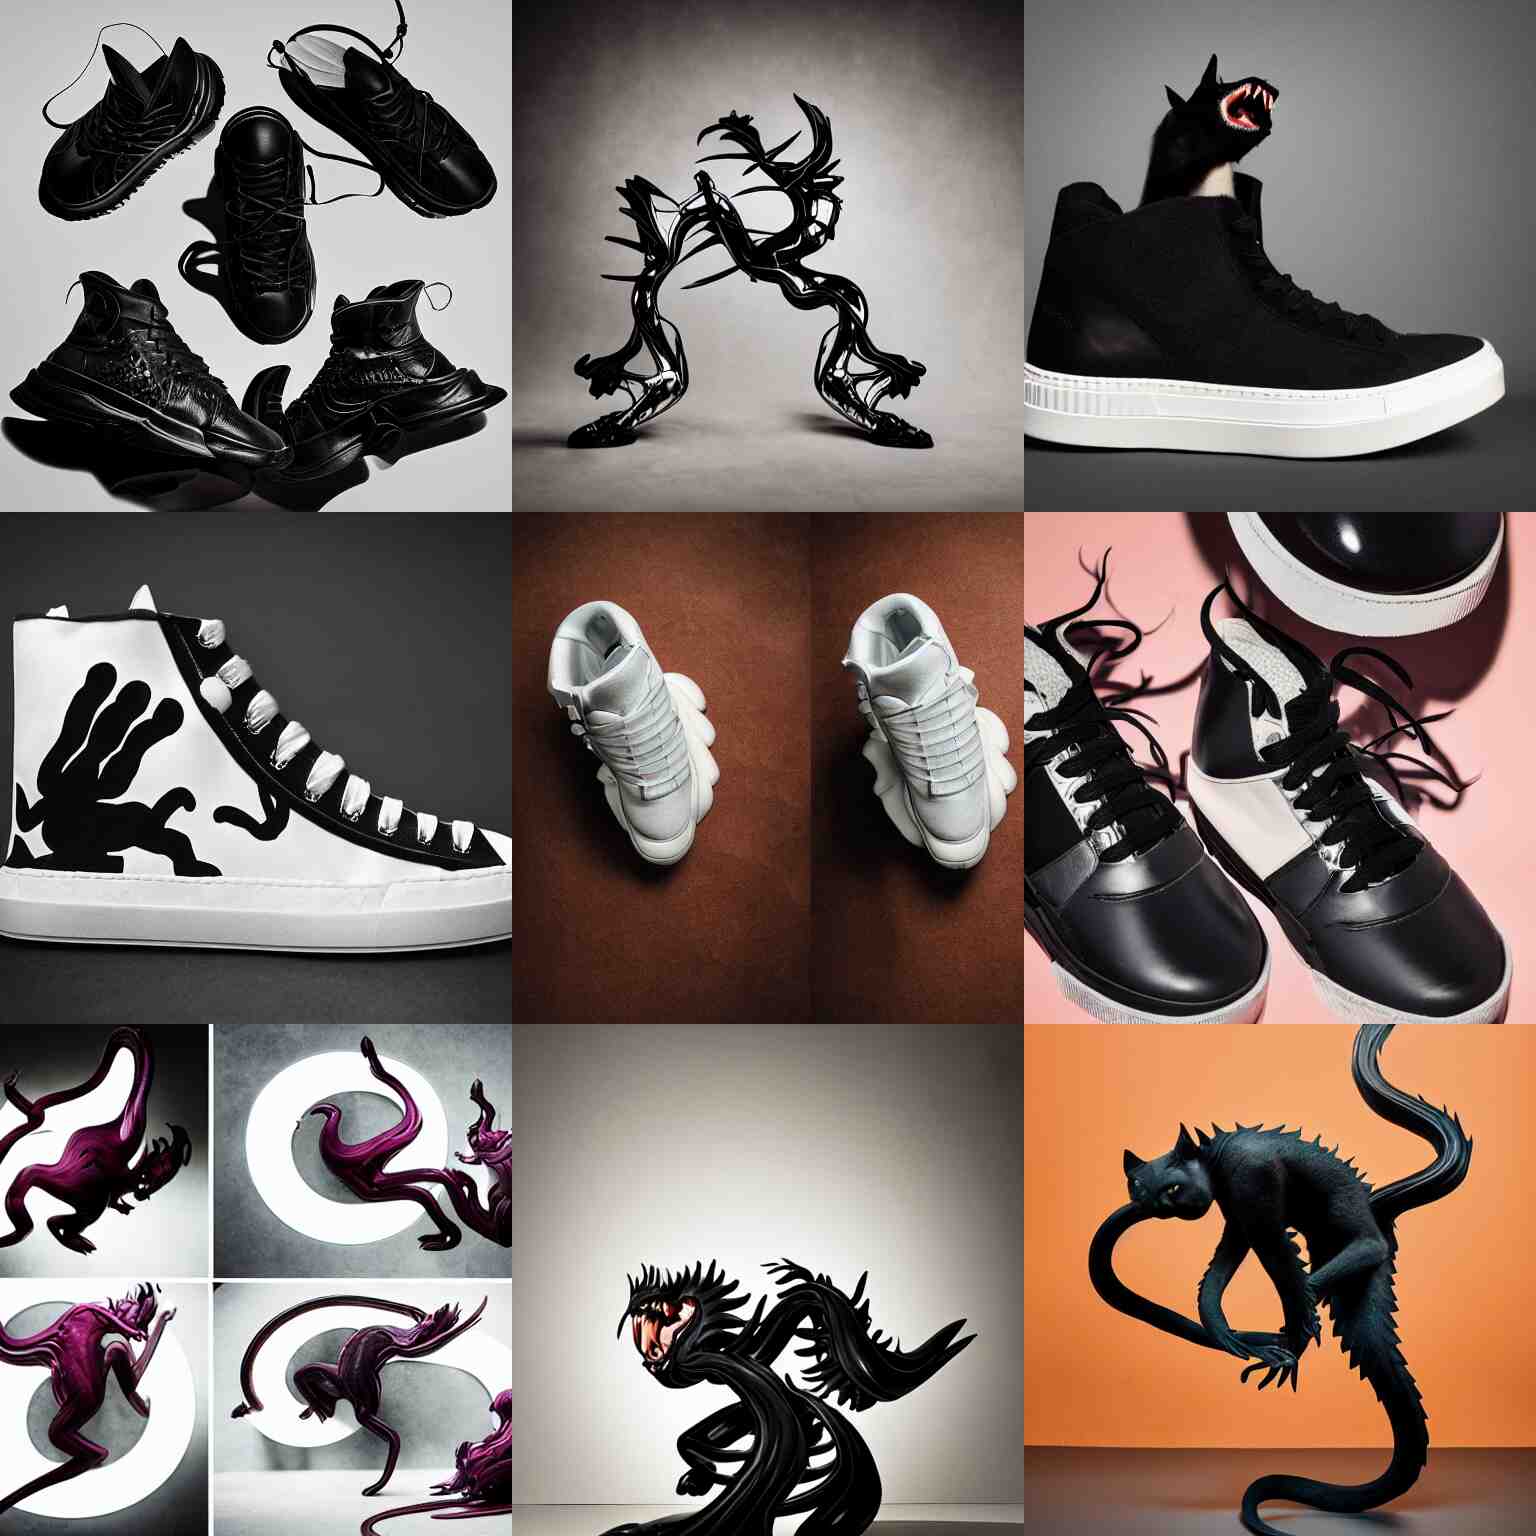 collector sneakers inspired by a displacer beast, studio photography, fun lighting, 